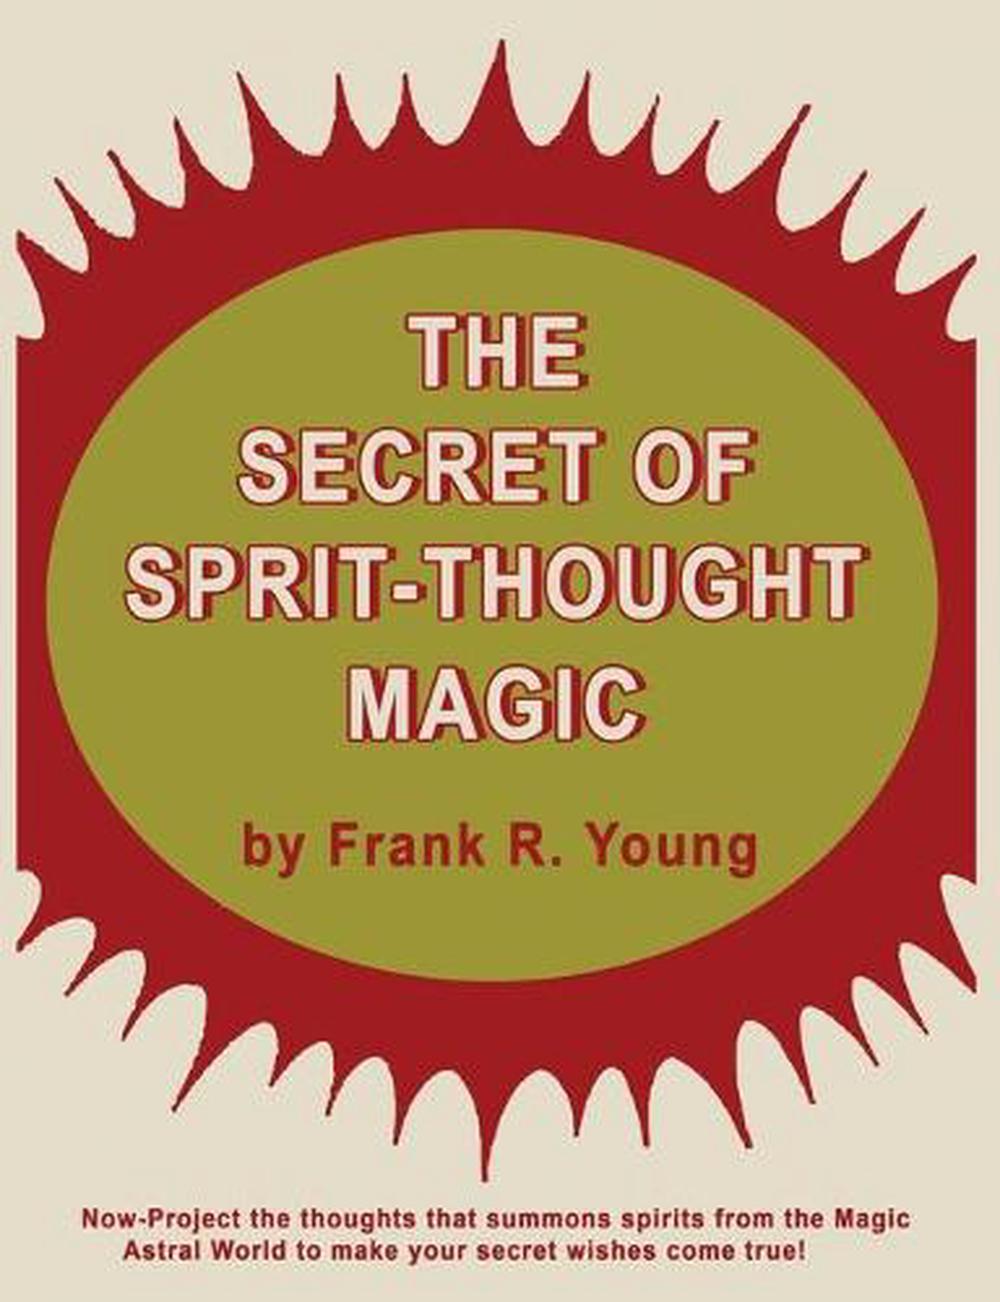 Frank R Young Digital Ebook Magic Pack #Hard2FindEBooks #CheaperThanAmazon #MustHave #RARE "Great 4 Developing Psychics" #FrankRYoung #EBook